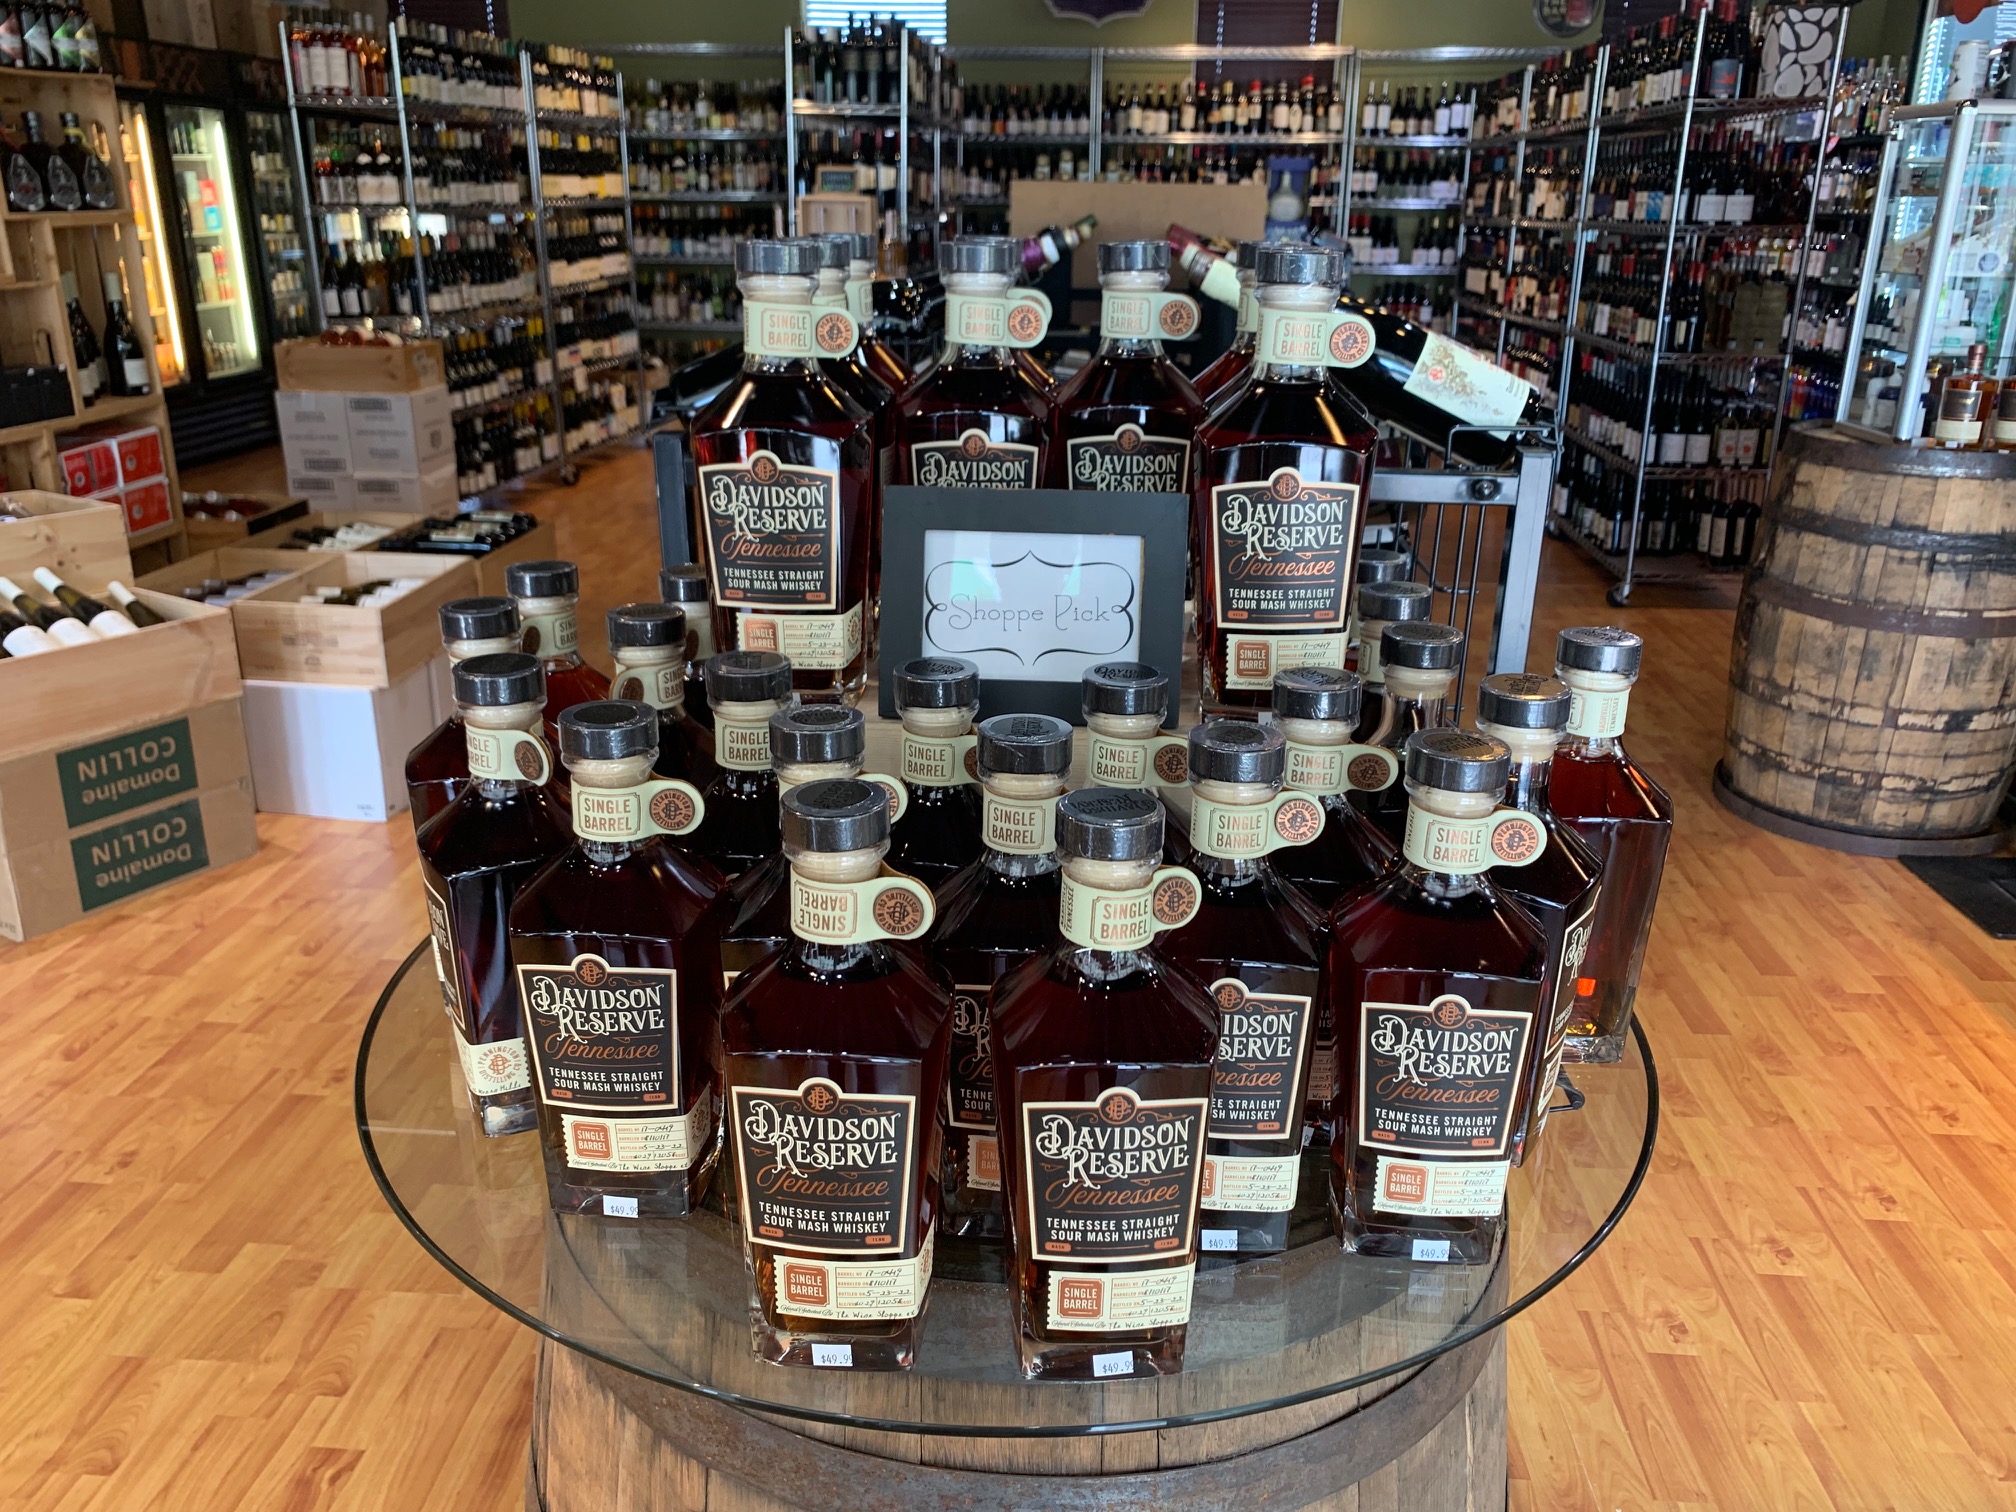 A display of whiskey bottles